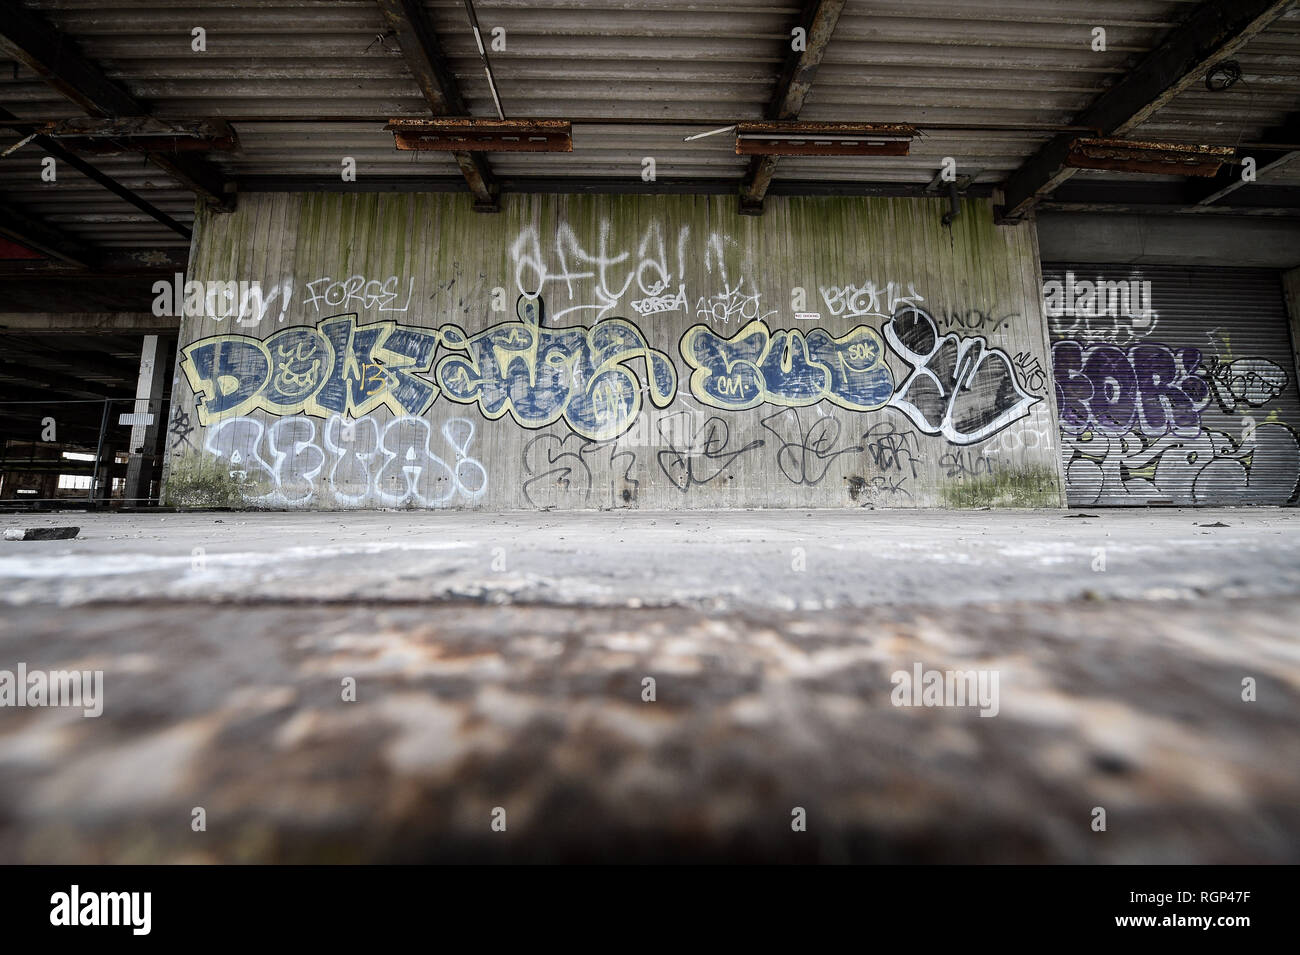 Graffiti on the loading bay outside the former Bristol Royal Mail sorting office, which is scheduled for demolition on 30th January 2019 after standing empty for 22 years, bringing an end to a building that became a playground for squatters, illegal ravers and fledgling graffiti artists. Stock Photo